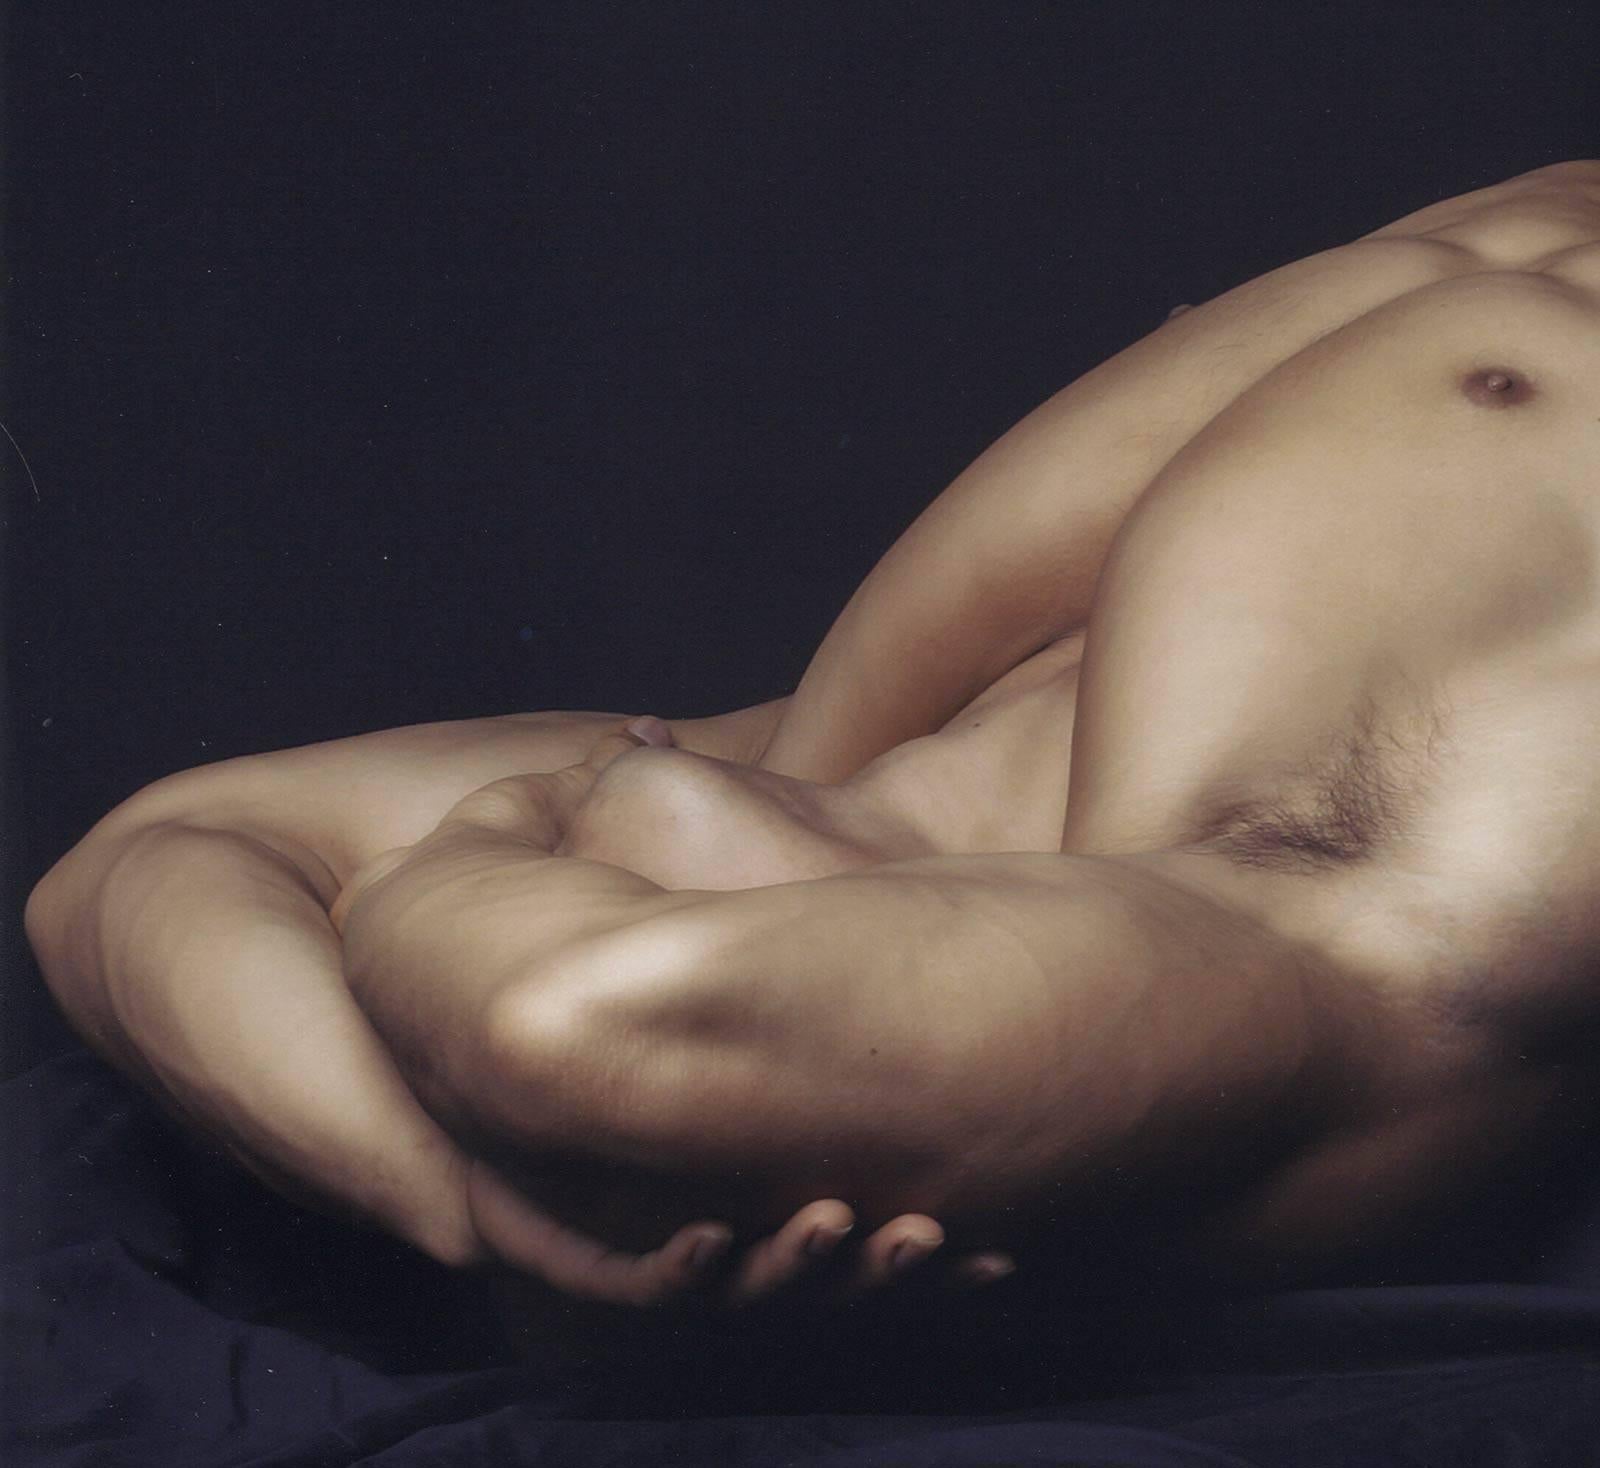 Male Nude #135 (young male nude lying with raised arms folded across his face) - Photograph by Dylan Ricci